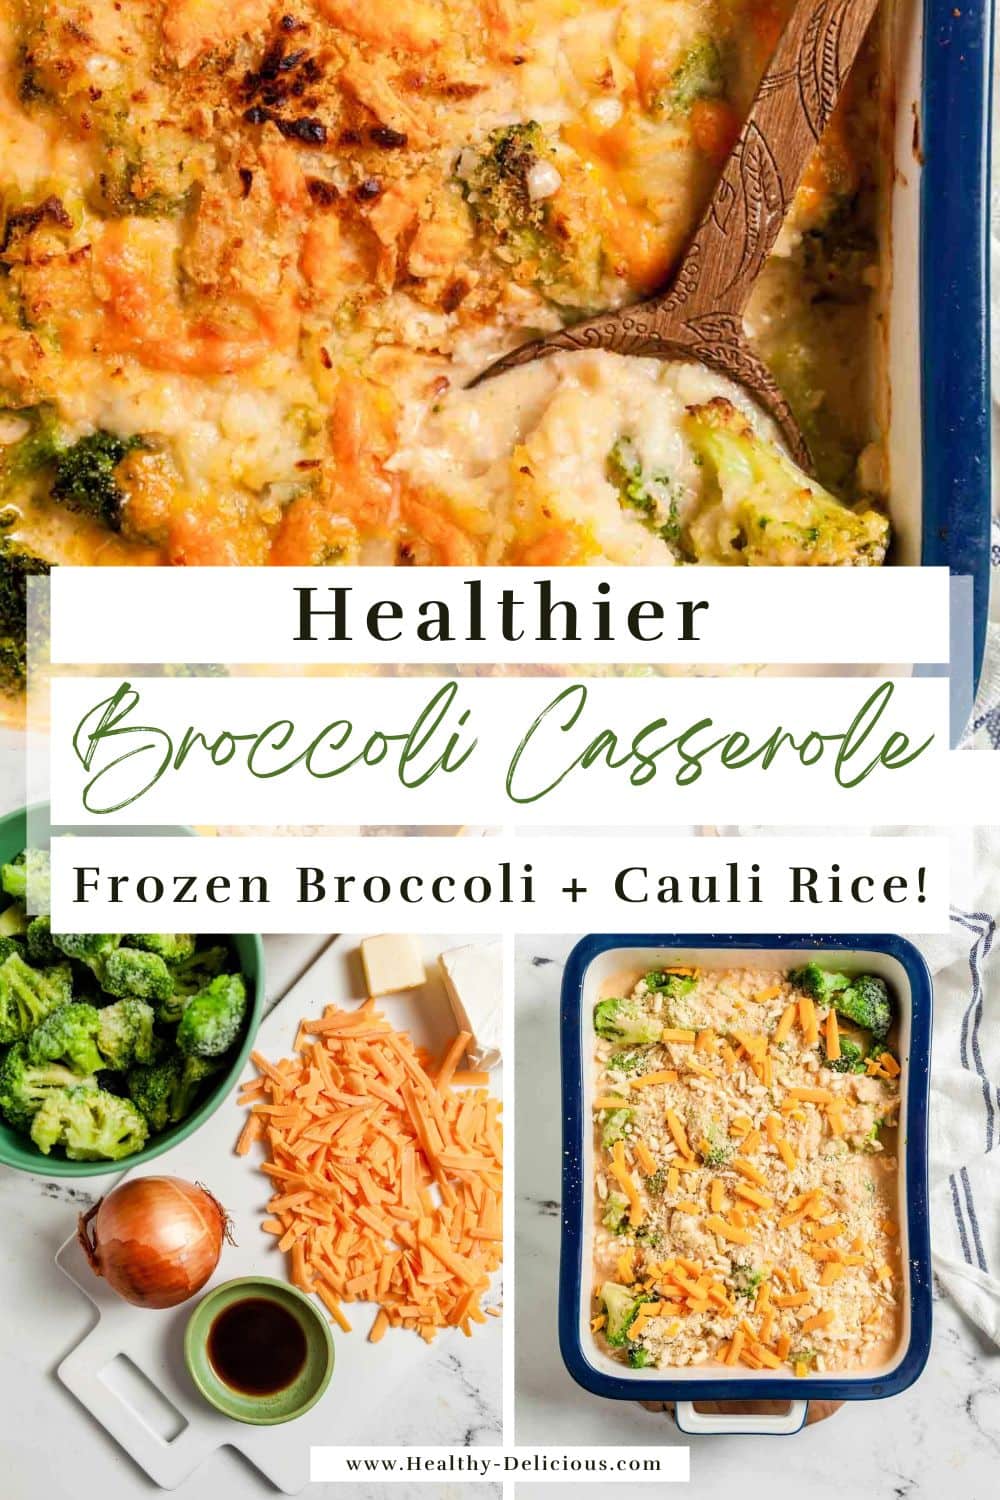 Cheesy broccoli casserole made with wholesome ingredients is a go-to side dish for family dinners! Whether you need a signature dish for the holidays or just want something quick and simple to go along with your air fryer rotisserie chicken, you're going to love this easy recipe. Delicious roasted broccoli is blanketed with a rich cheese sauce, topped with a buttery Ritz cracker topping, and baked to perfection. To keep things on the lighter side, I swapped out the traditional rice for cauliflower rice. It adds the perfect texture while keeping the recipe relatively low carb. via @HealthyDelish